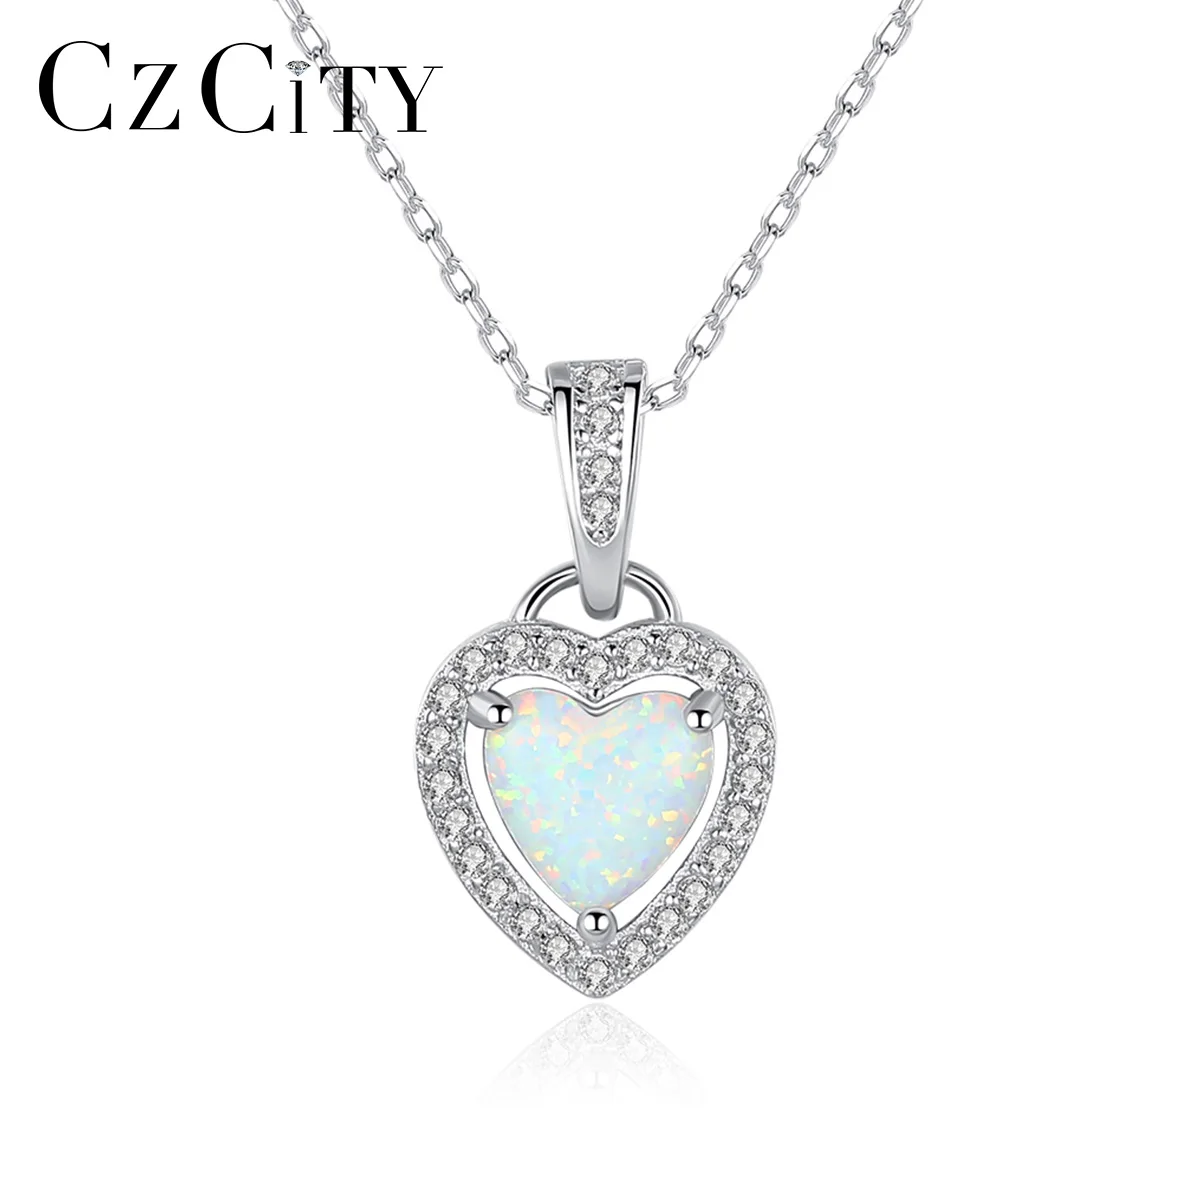 

CZCITY 925 Sterling Silver Heart Fire Opal Pendant Necklace for Women Sparkling Love Necklace Fine Jewelry Valentine's Day Gifts